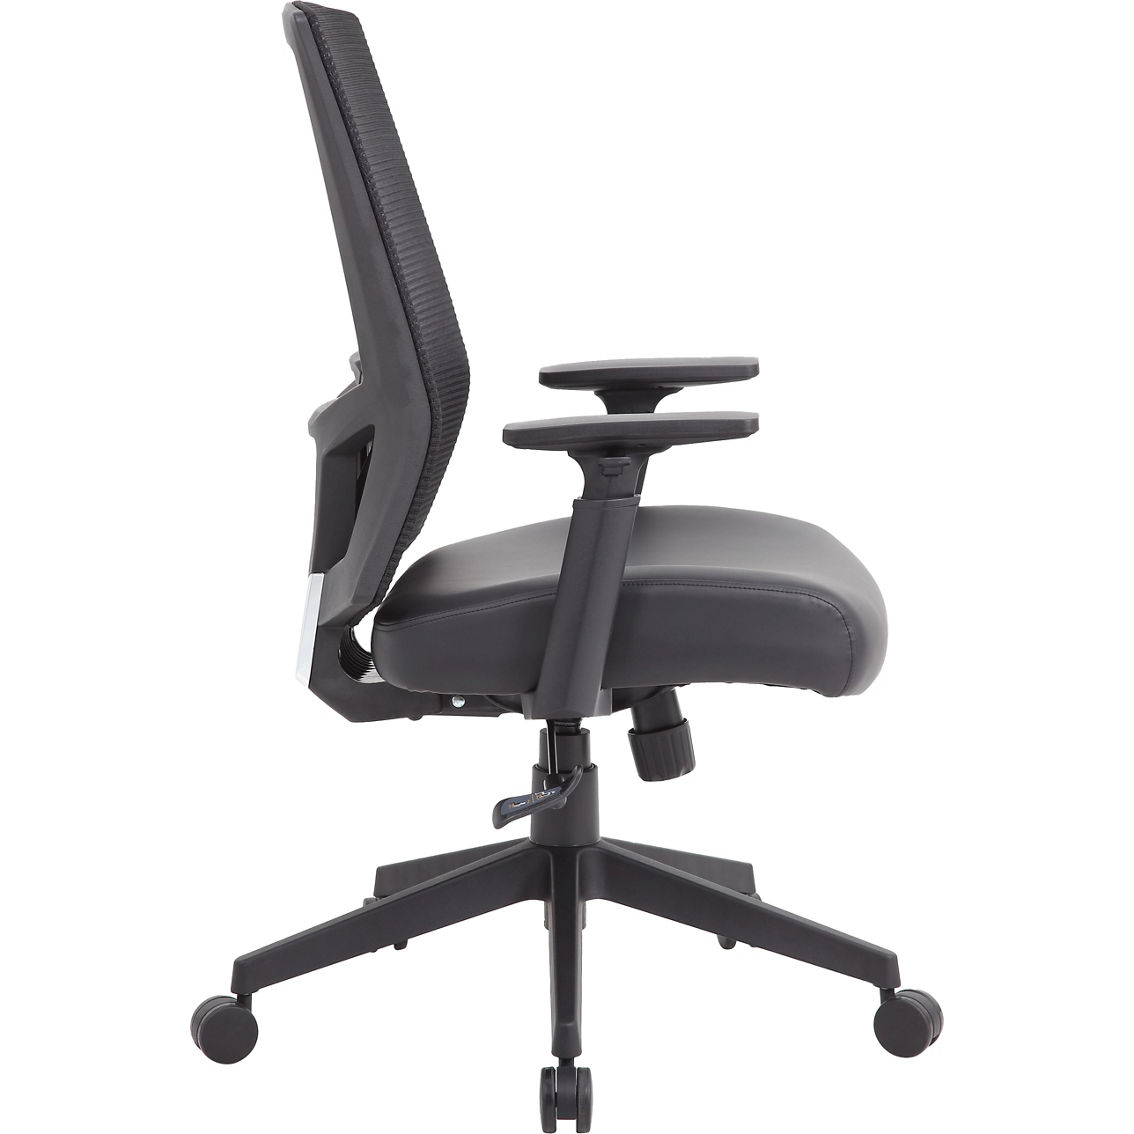 Presidential Seating Mesh Back Task Chair - Image 3 of 3